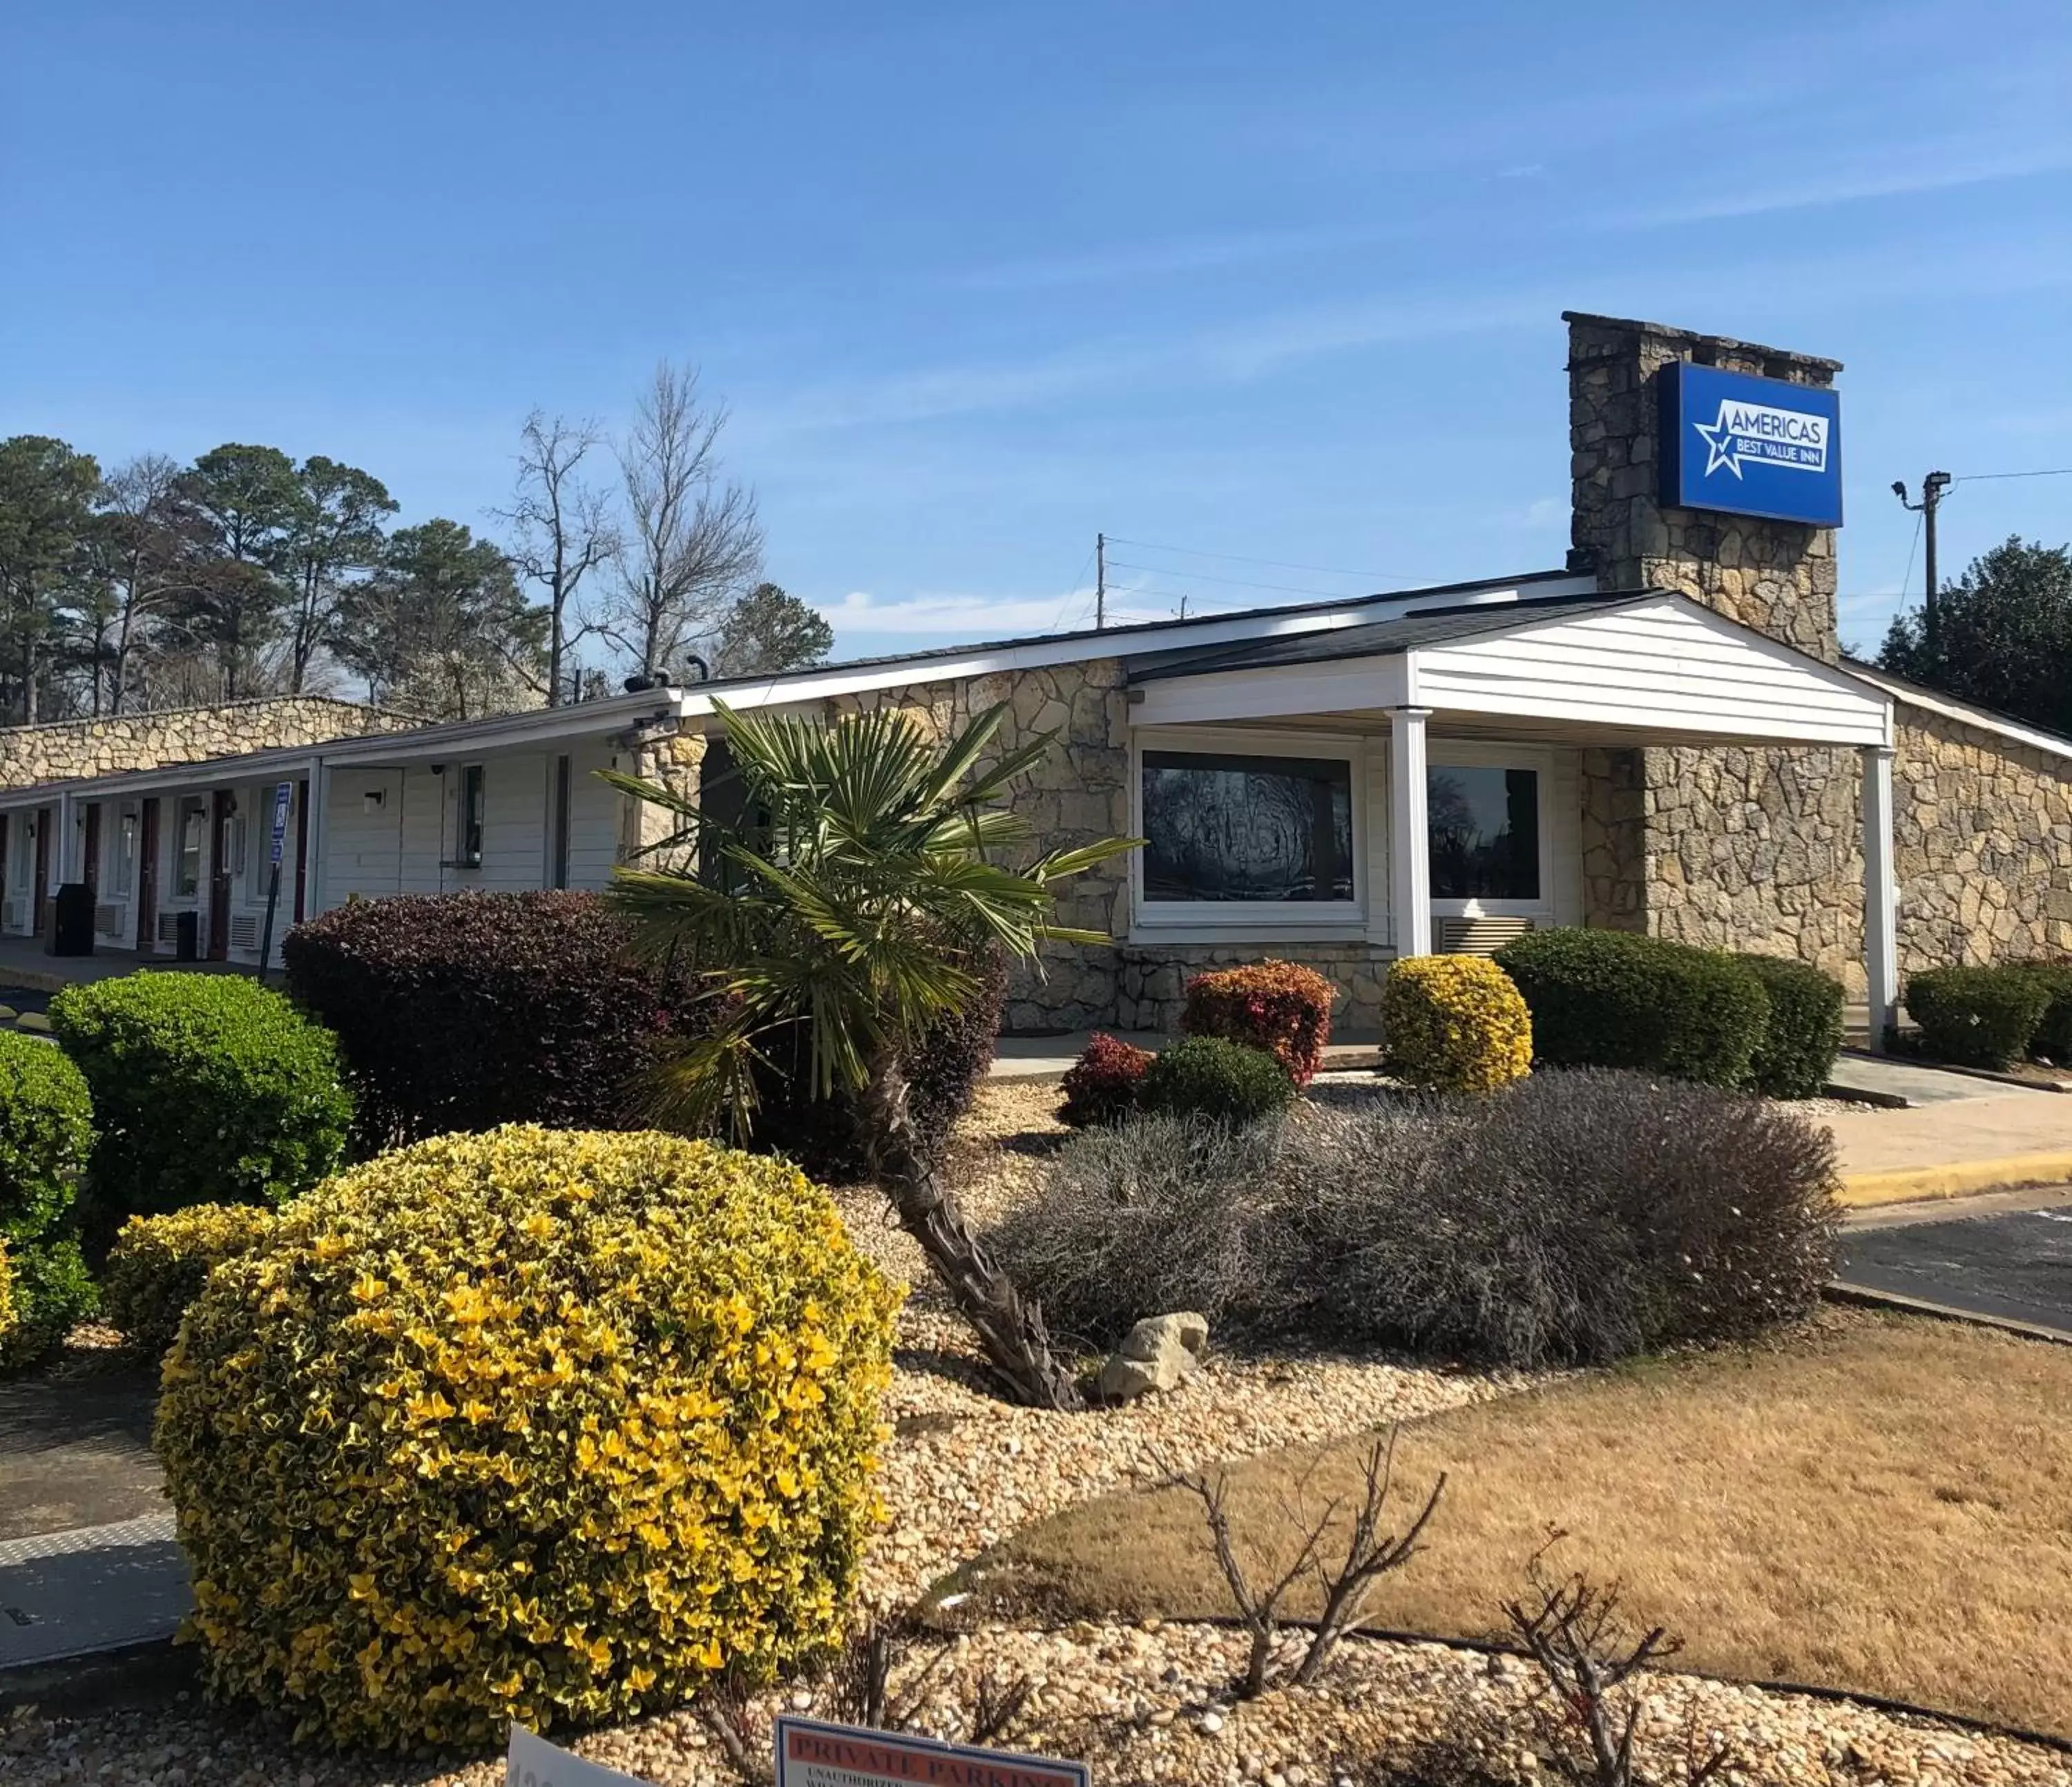 Property Building in America's Best Value Inn Conyers